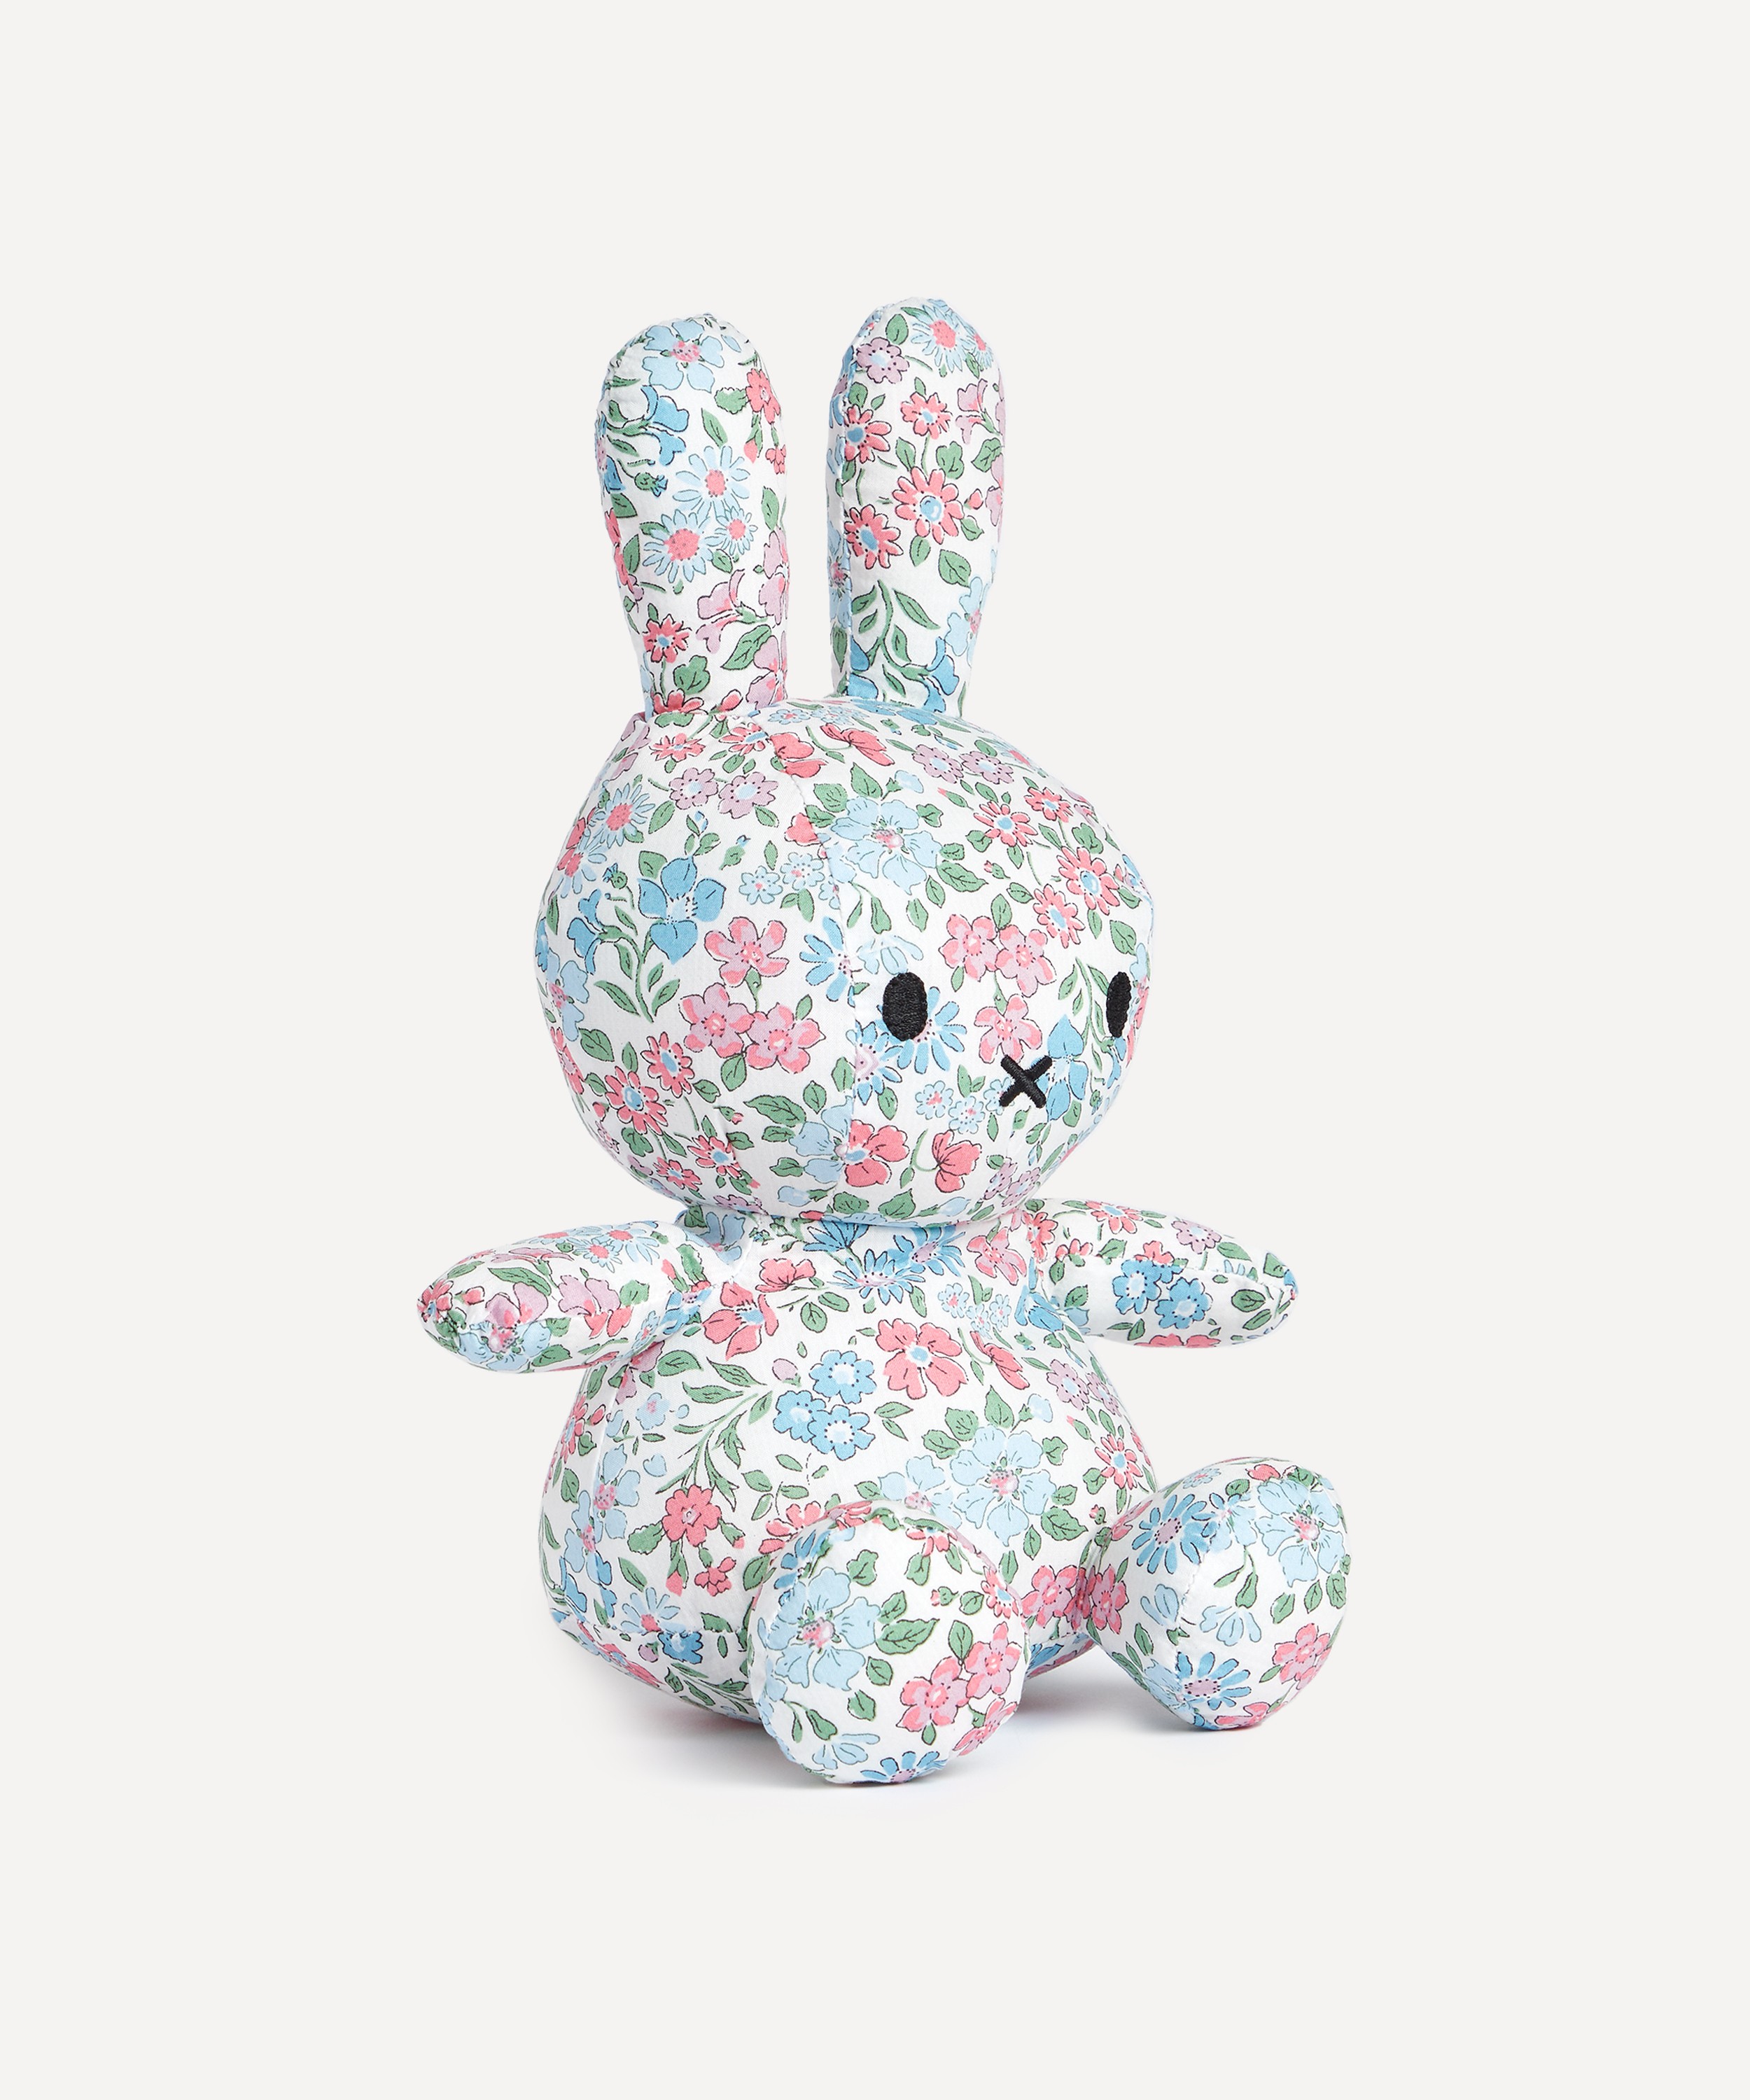 Miffy - Annabella Print Miffy Soft Toy image number 0